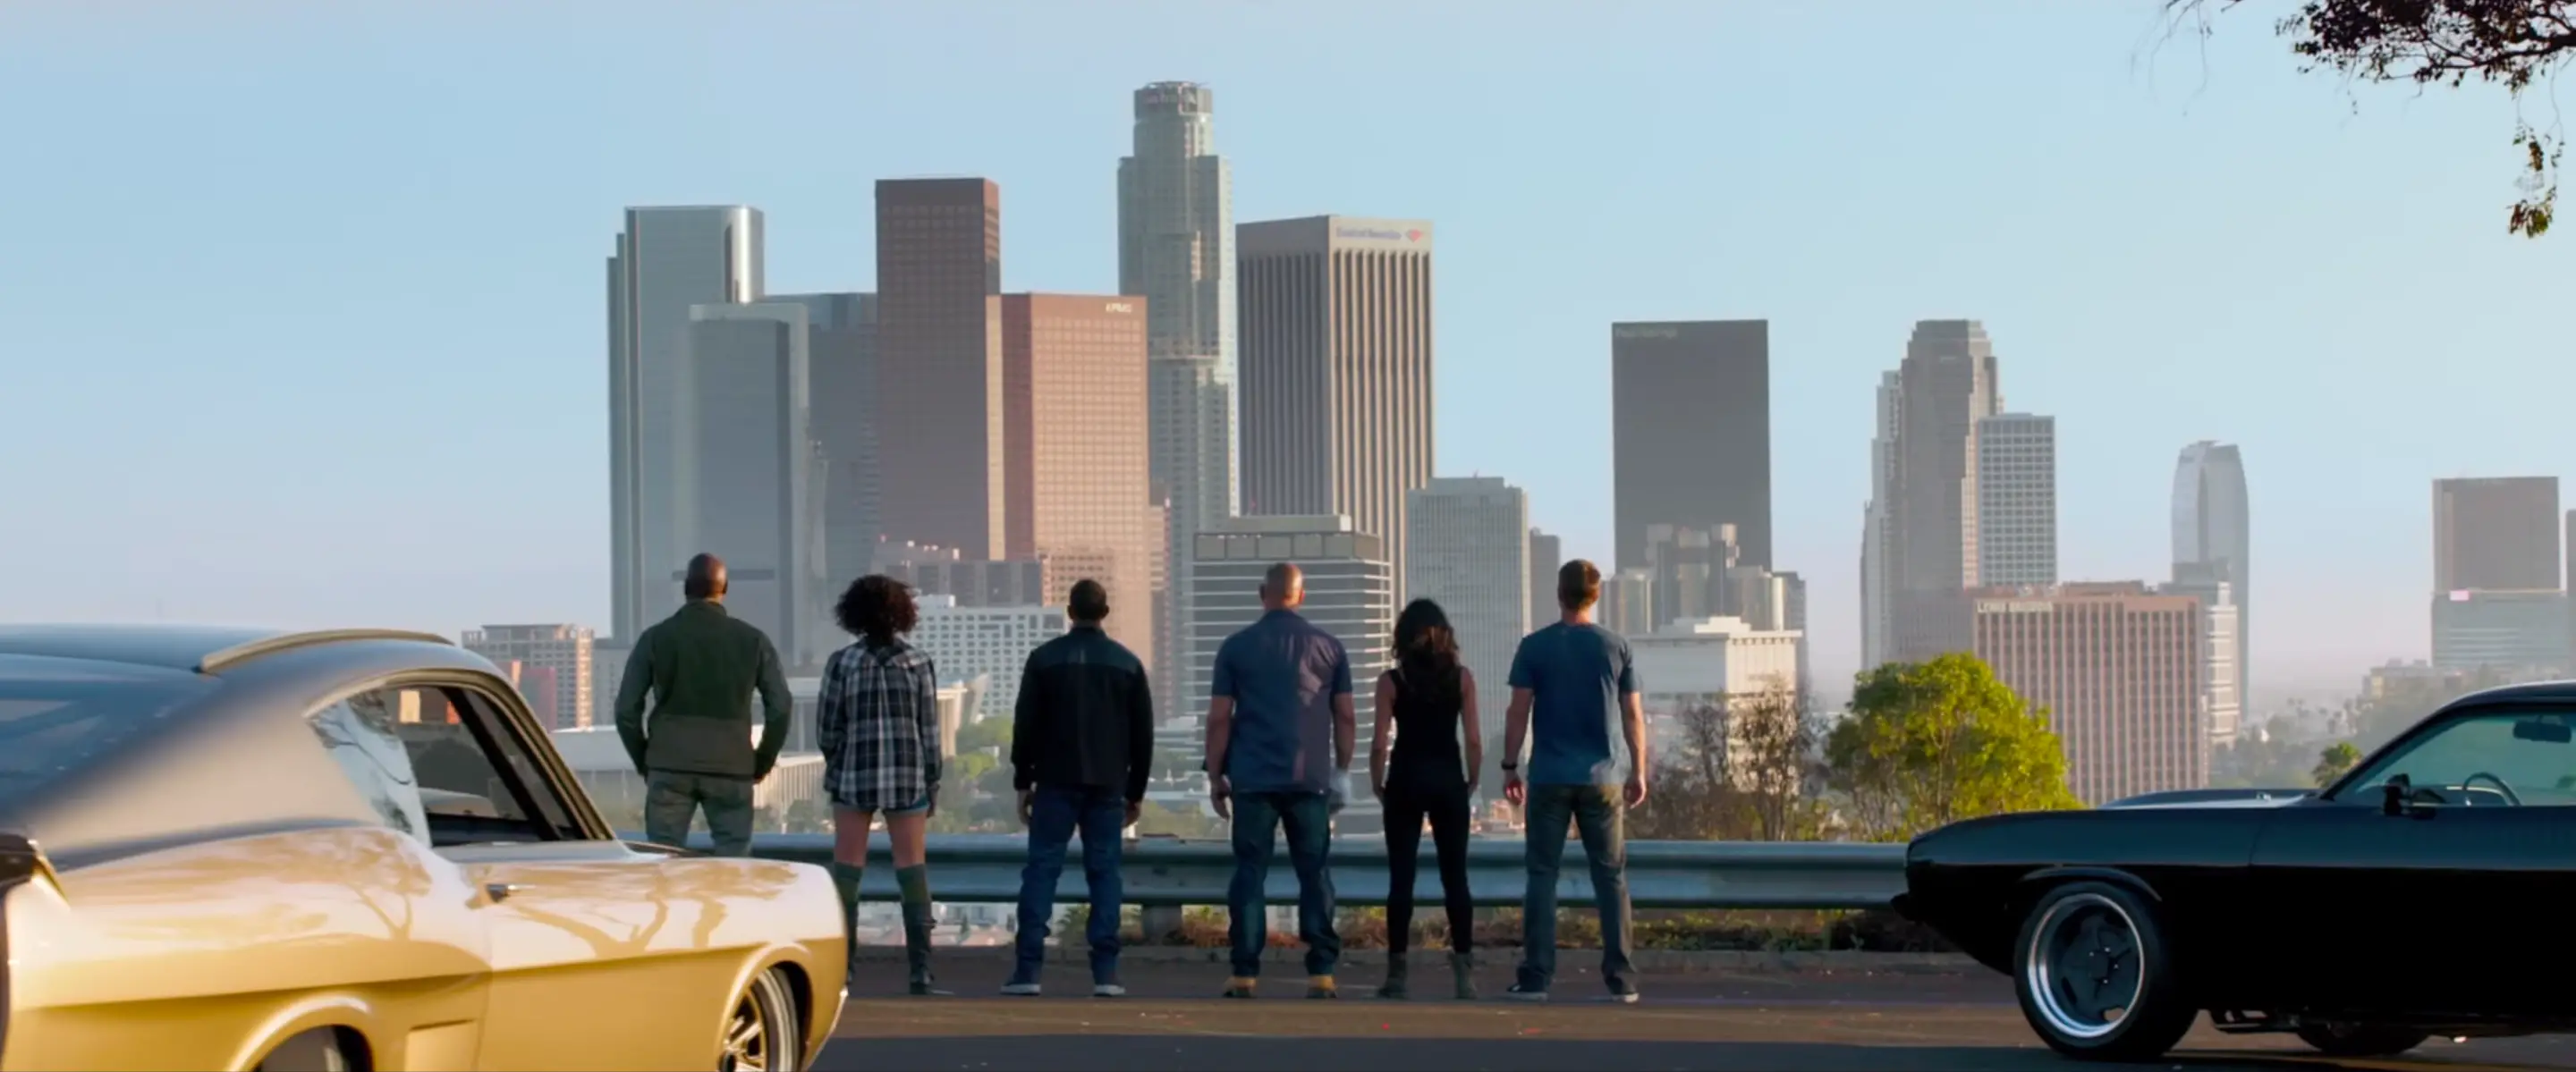 Furious 7 Fast Furious 7 2015 Movie Hd Wallpapers